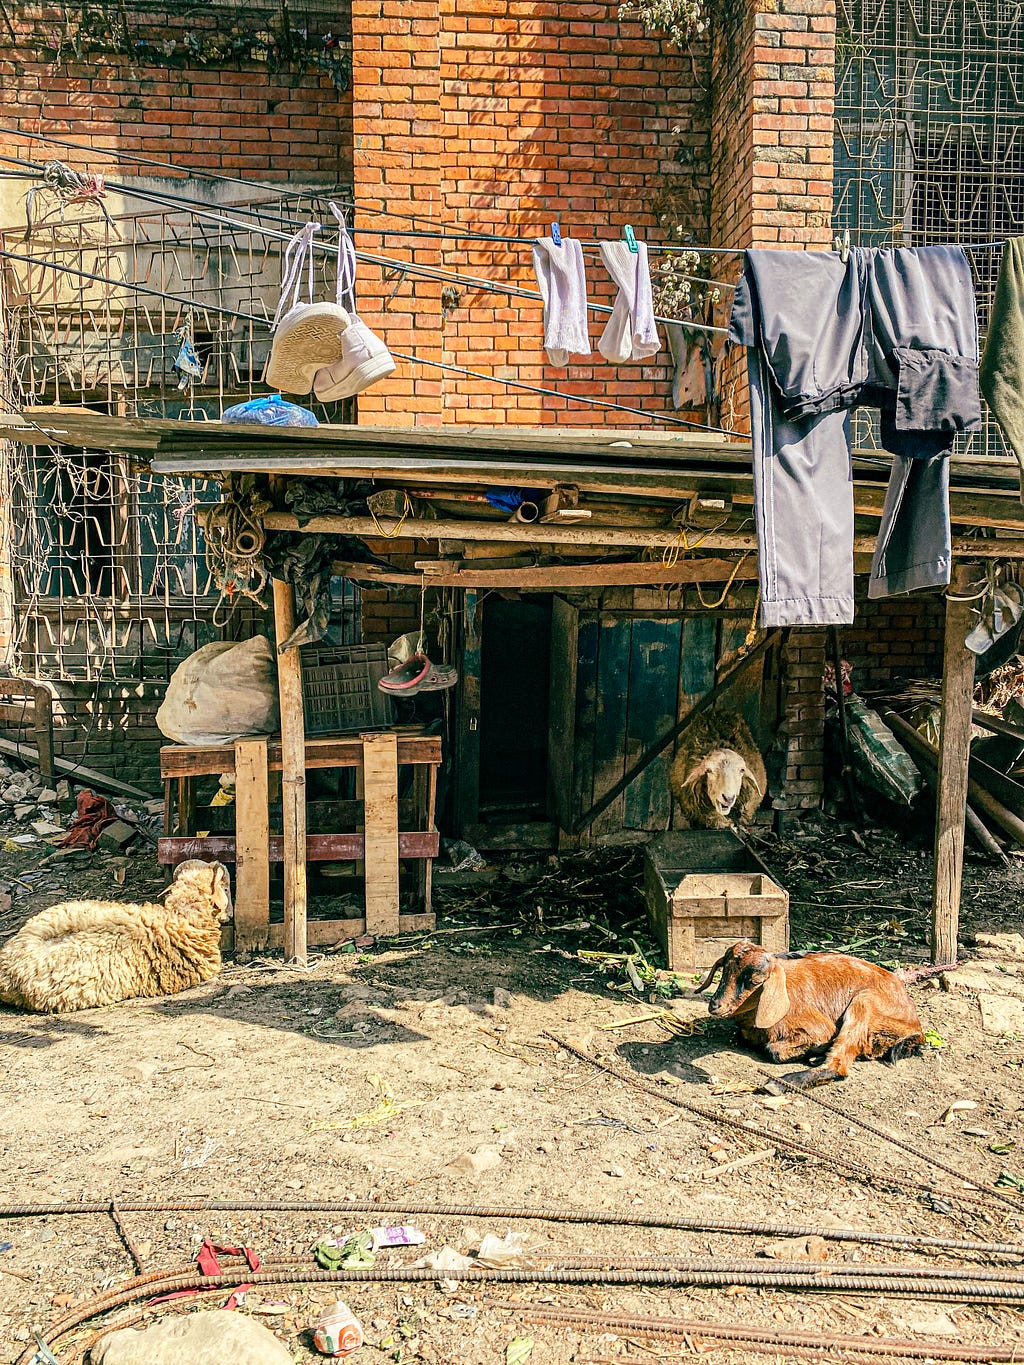 The goats and sheep of Kathmandu. Photo by Author